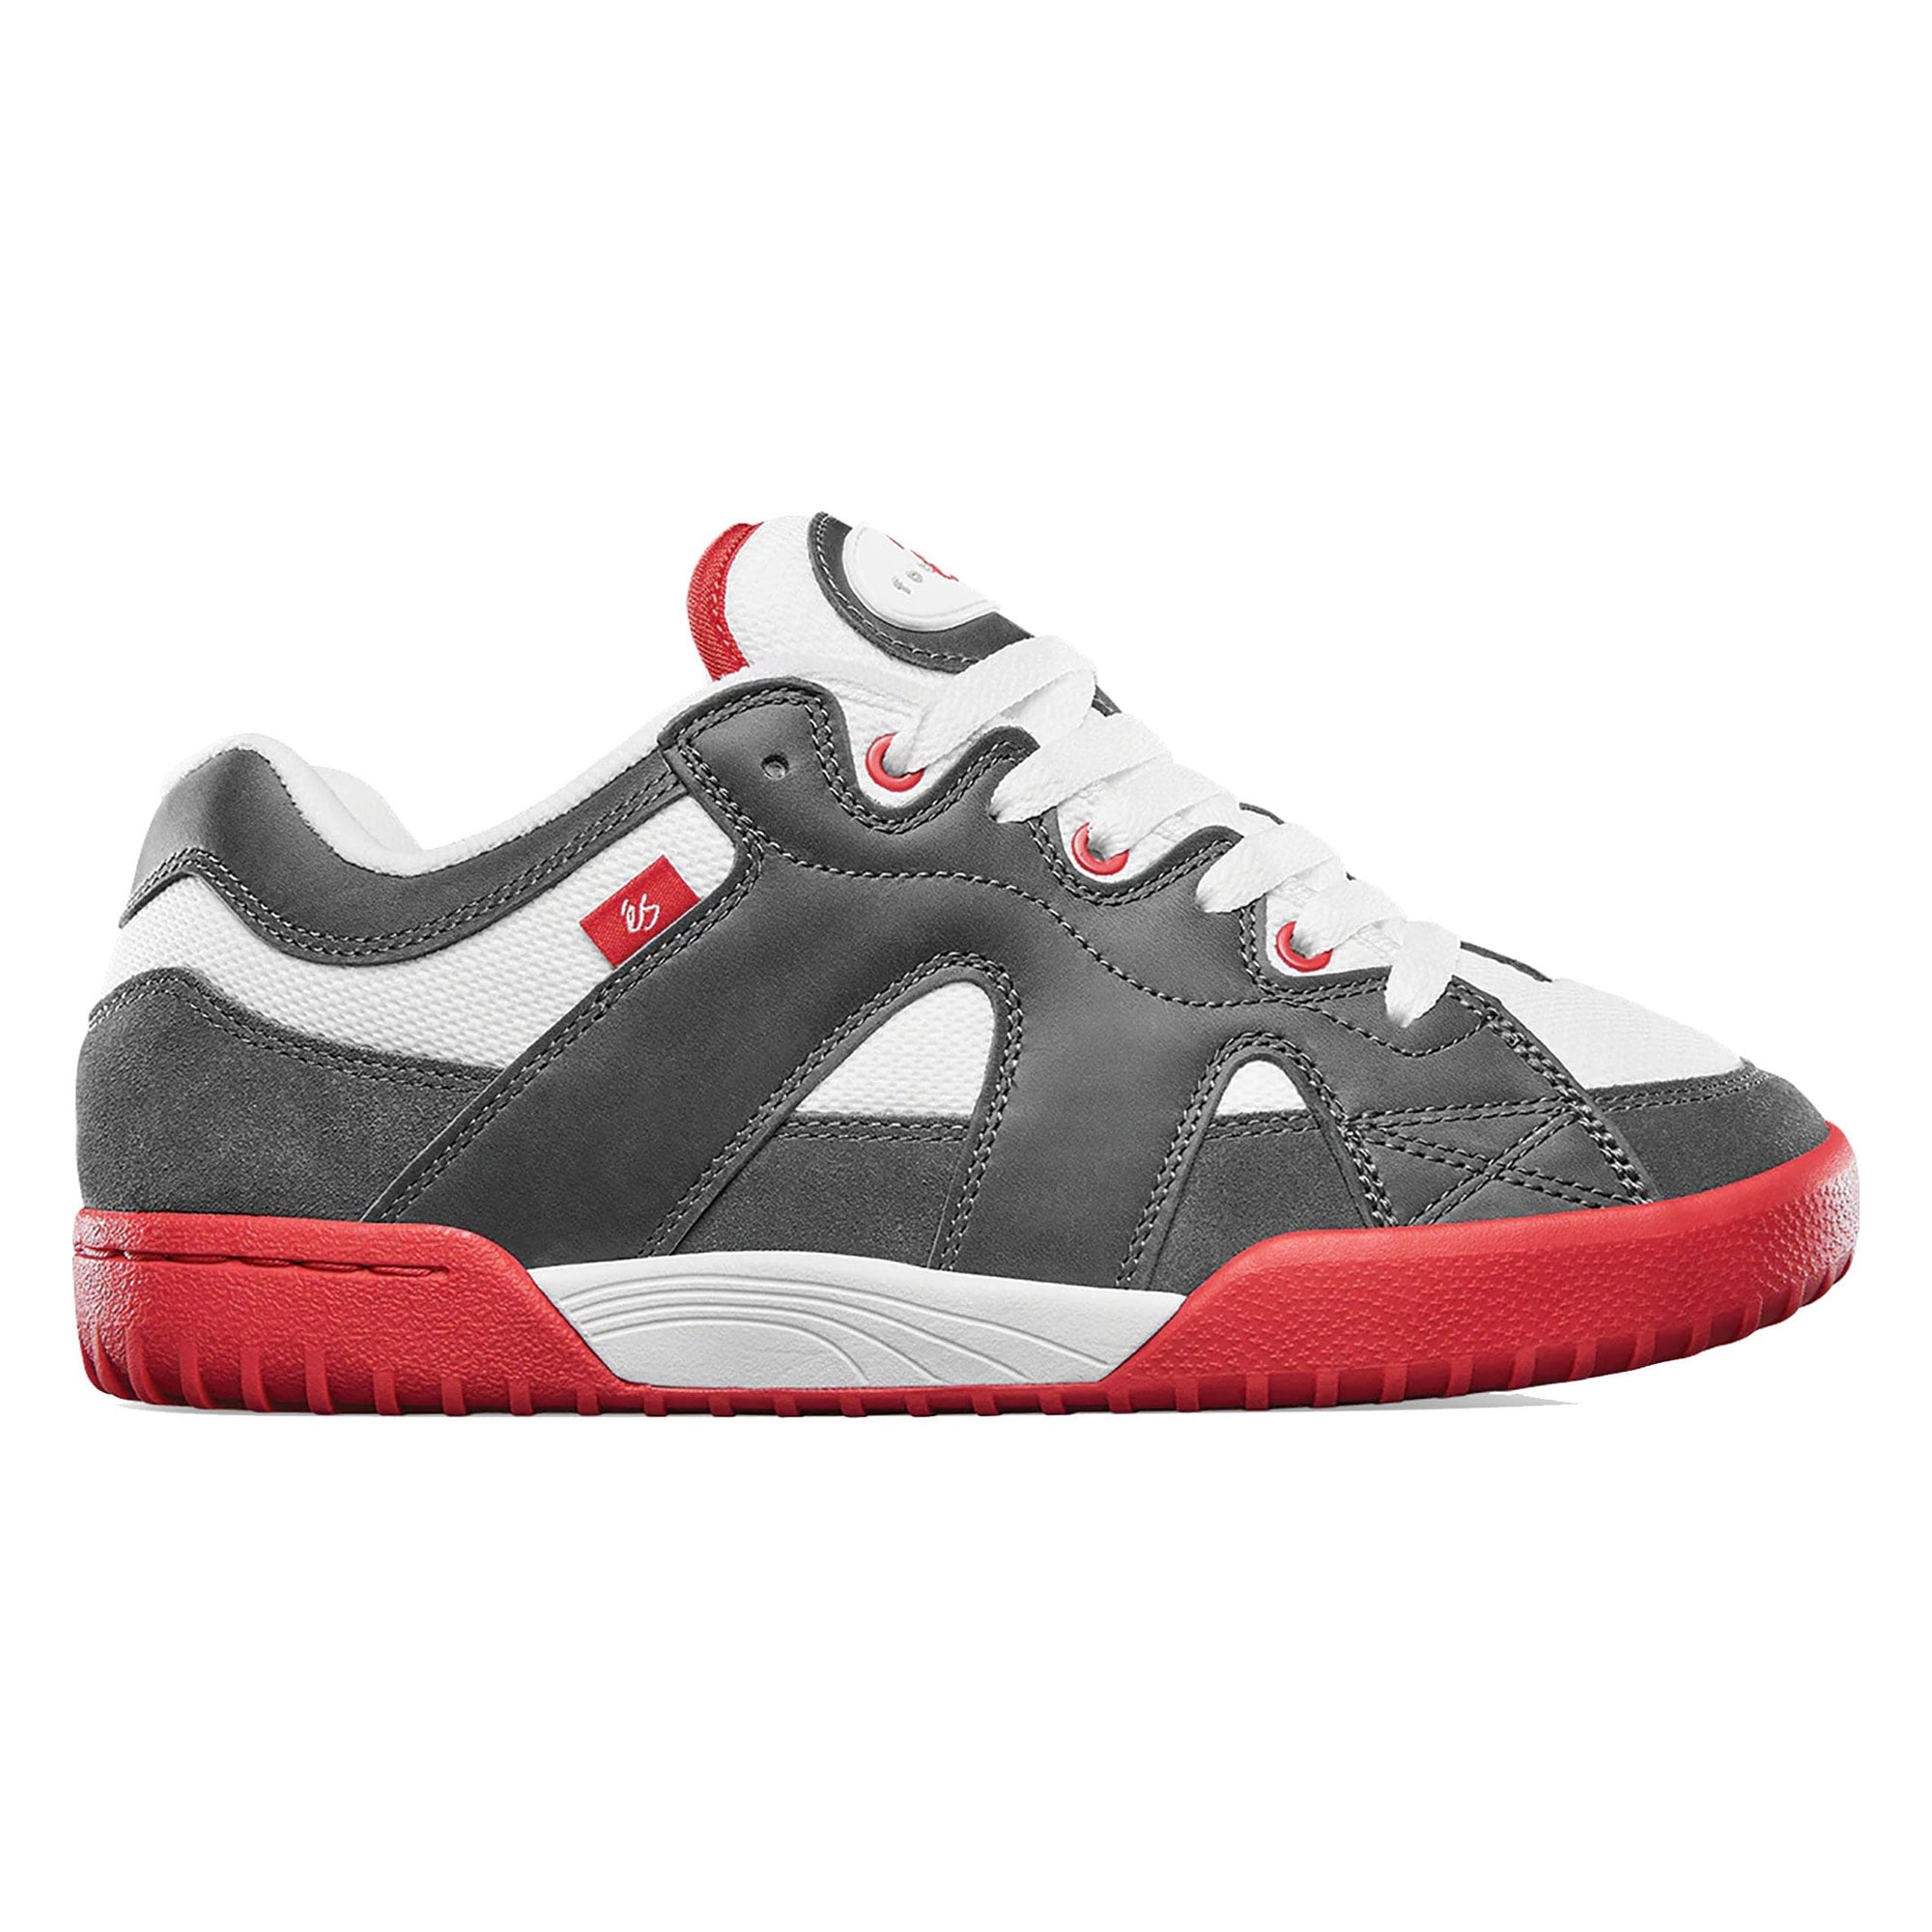 eS SKB Shoe ONE NINE 7 gry/whi/red grey/white/red